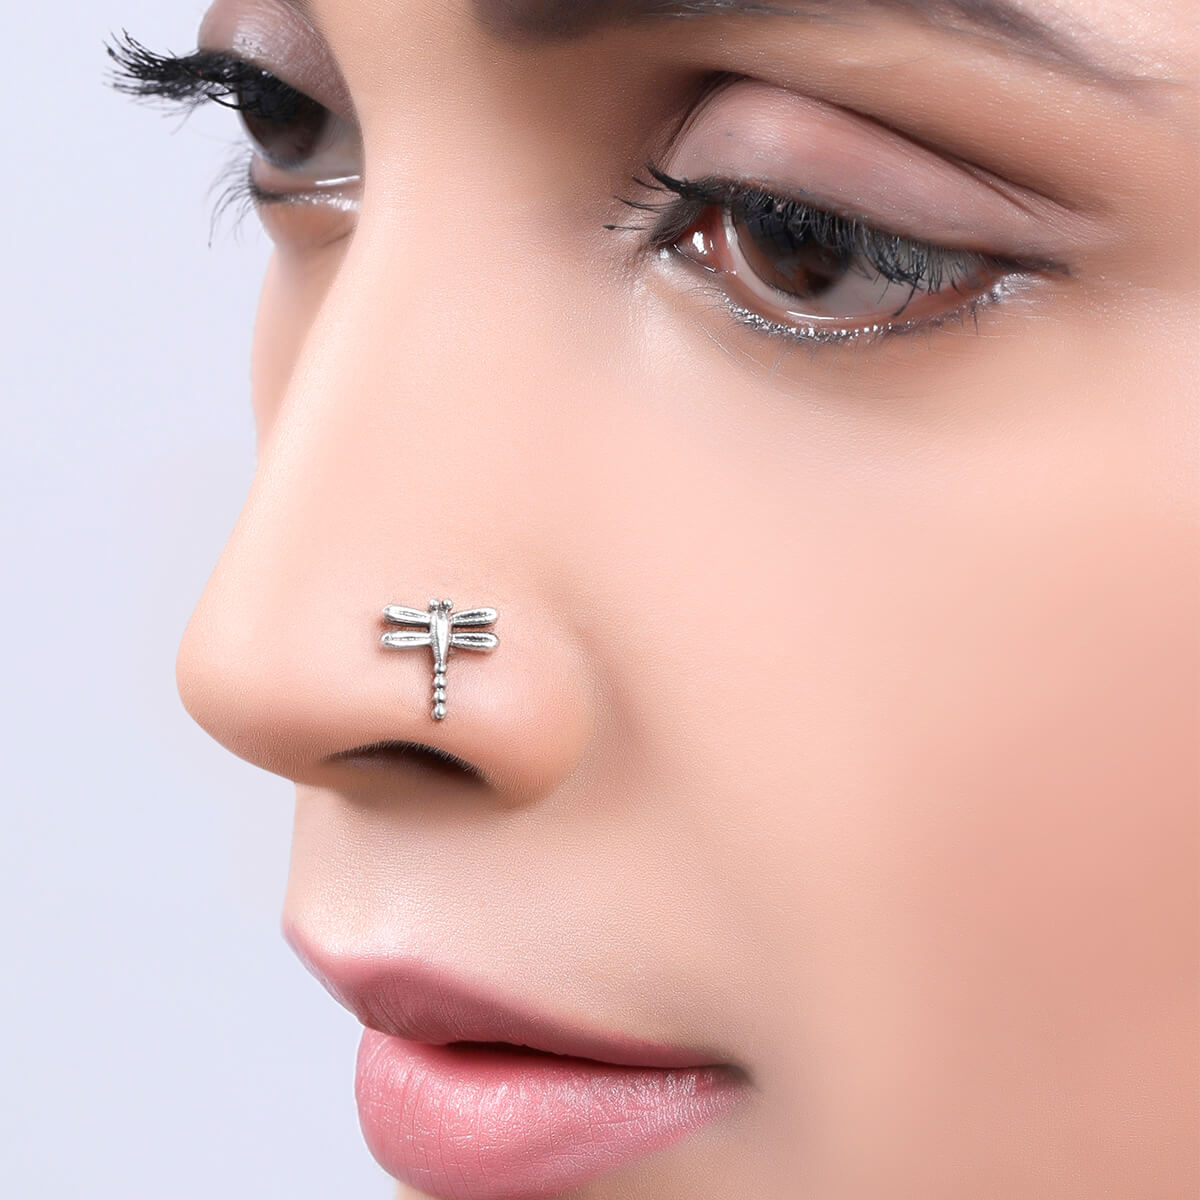 Get a Cooler Look By Wearing a Silver Nose Pin